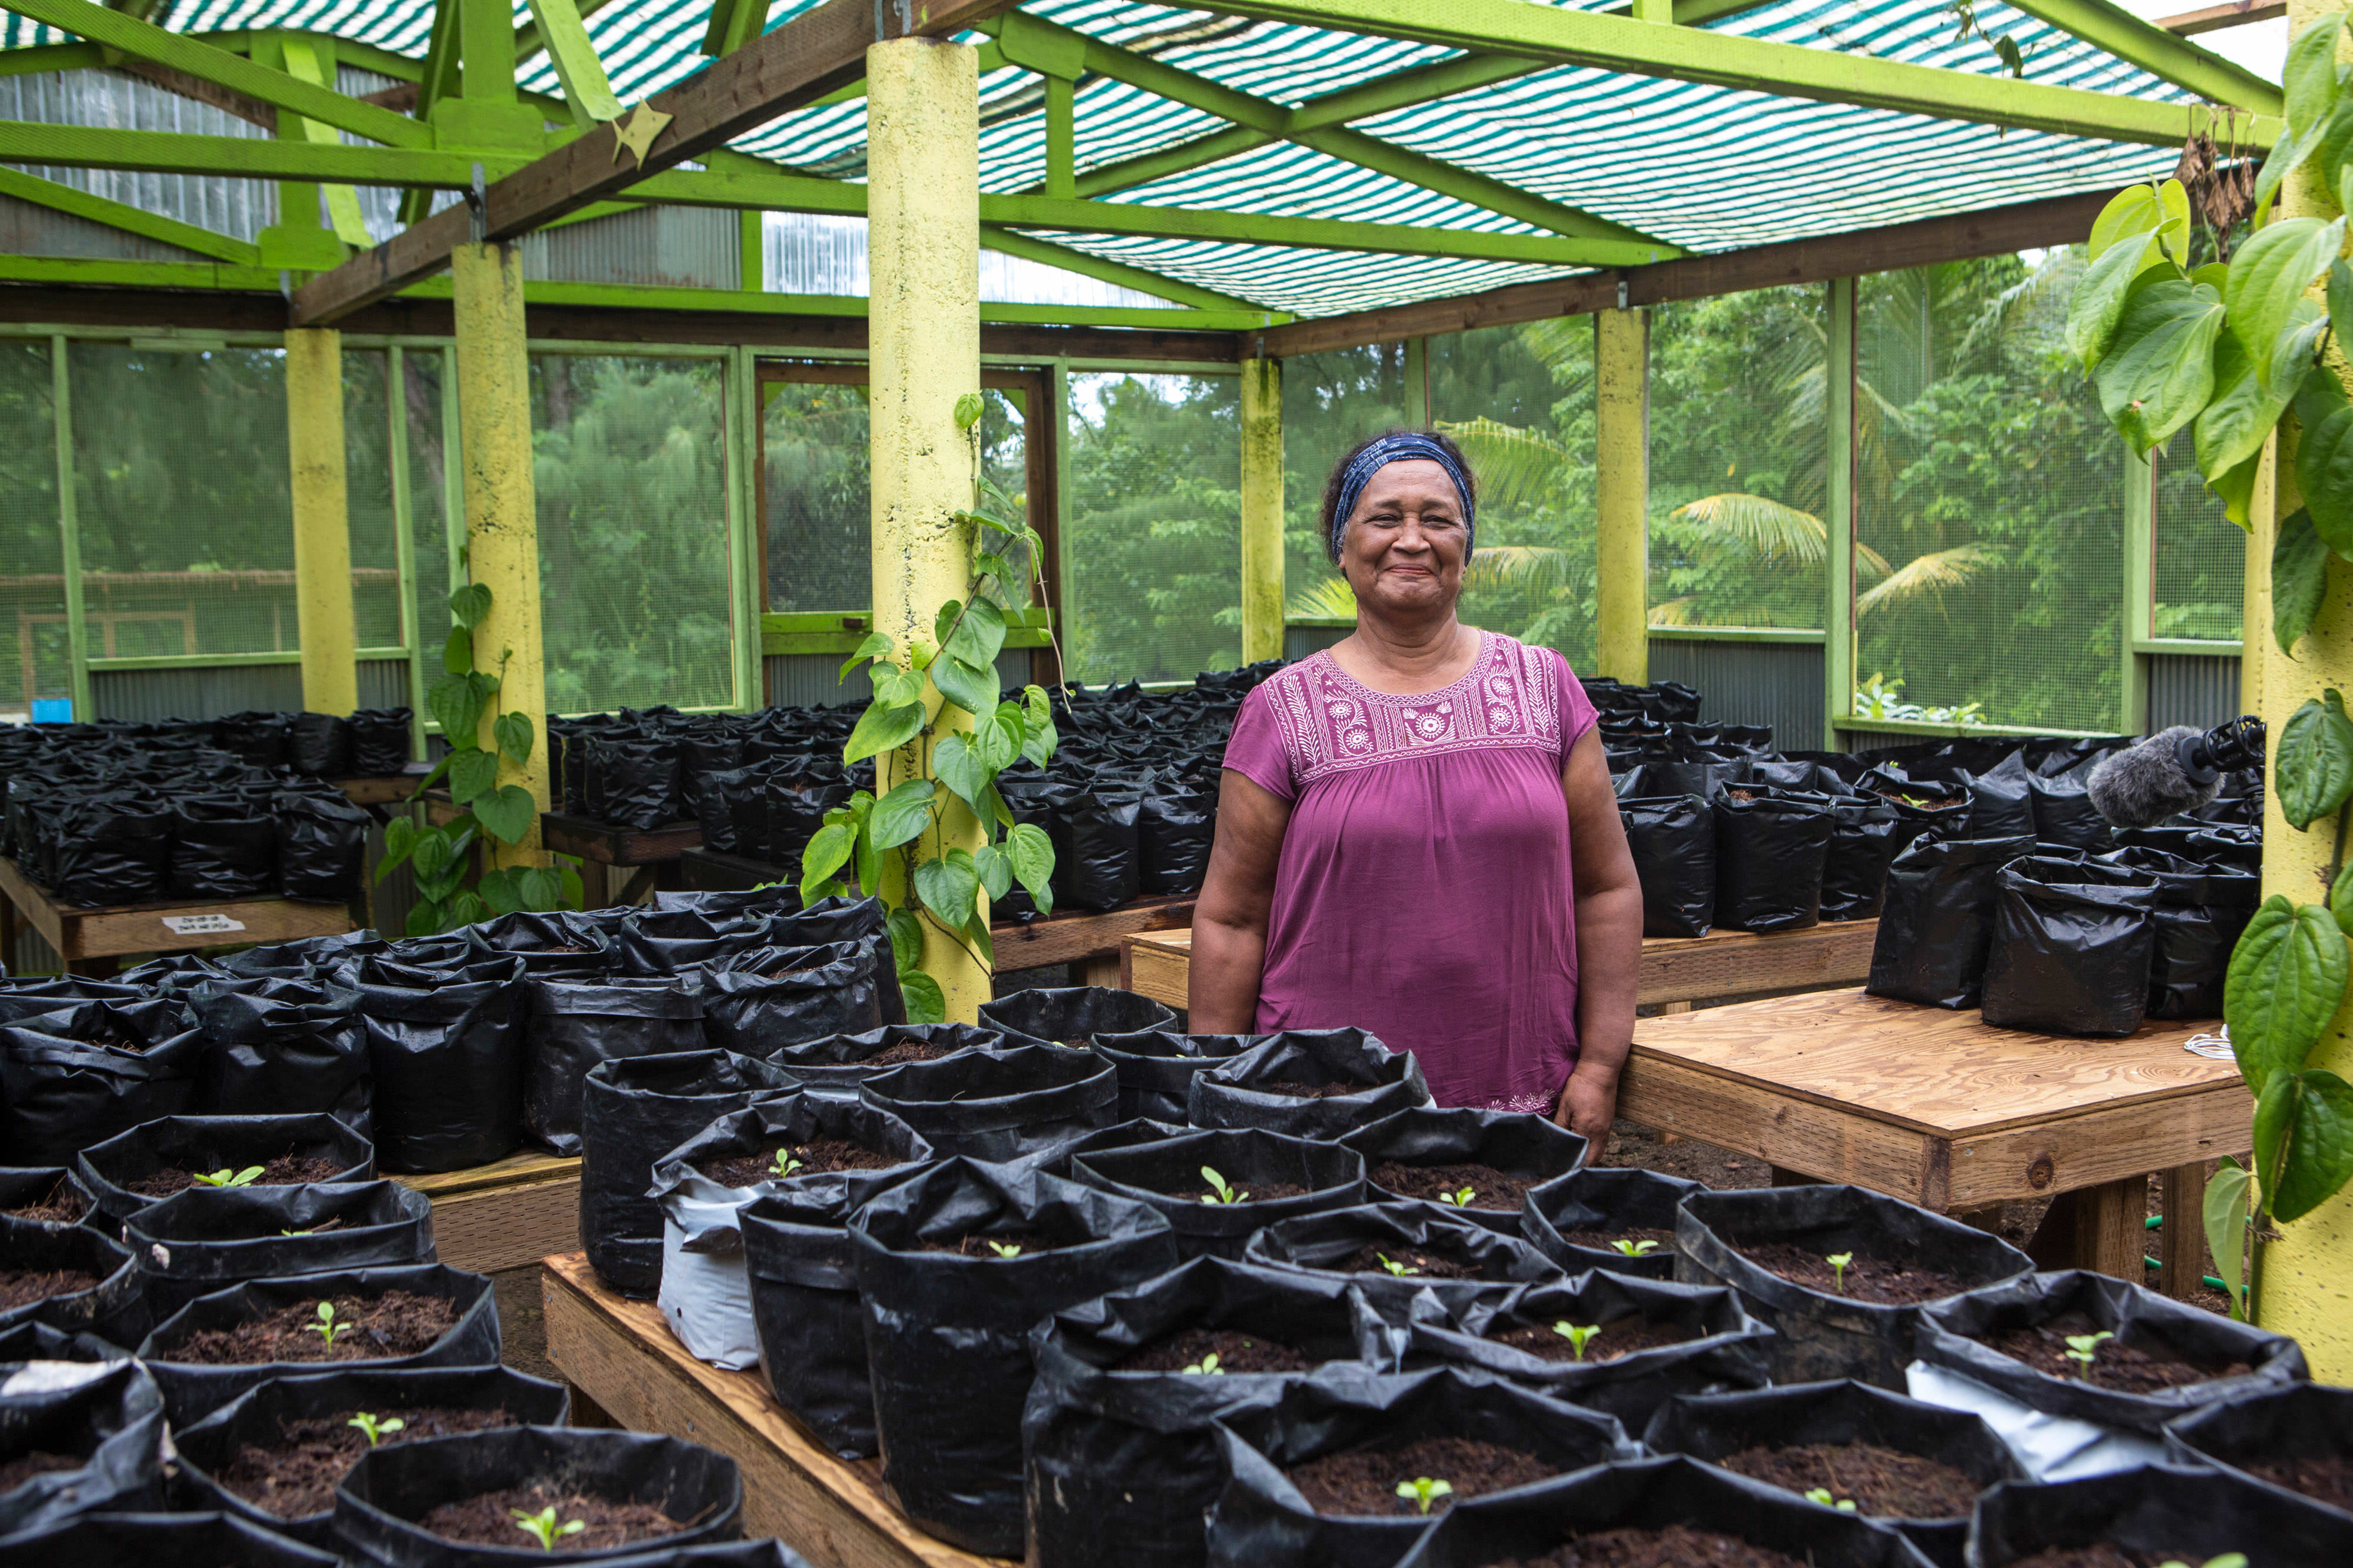 Woman stands smiling in greenhouse with plants budding around her on all sides